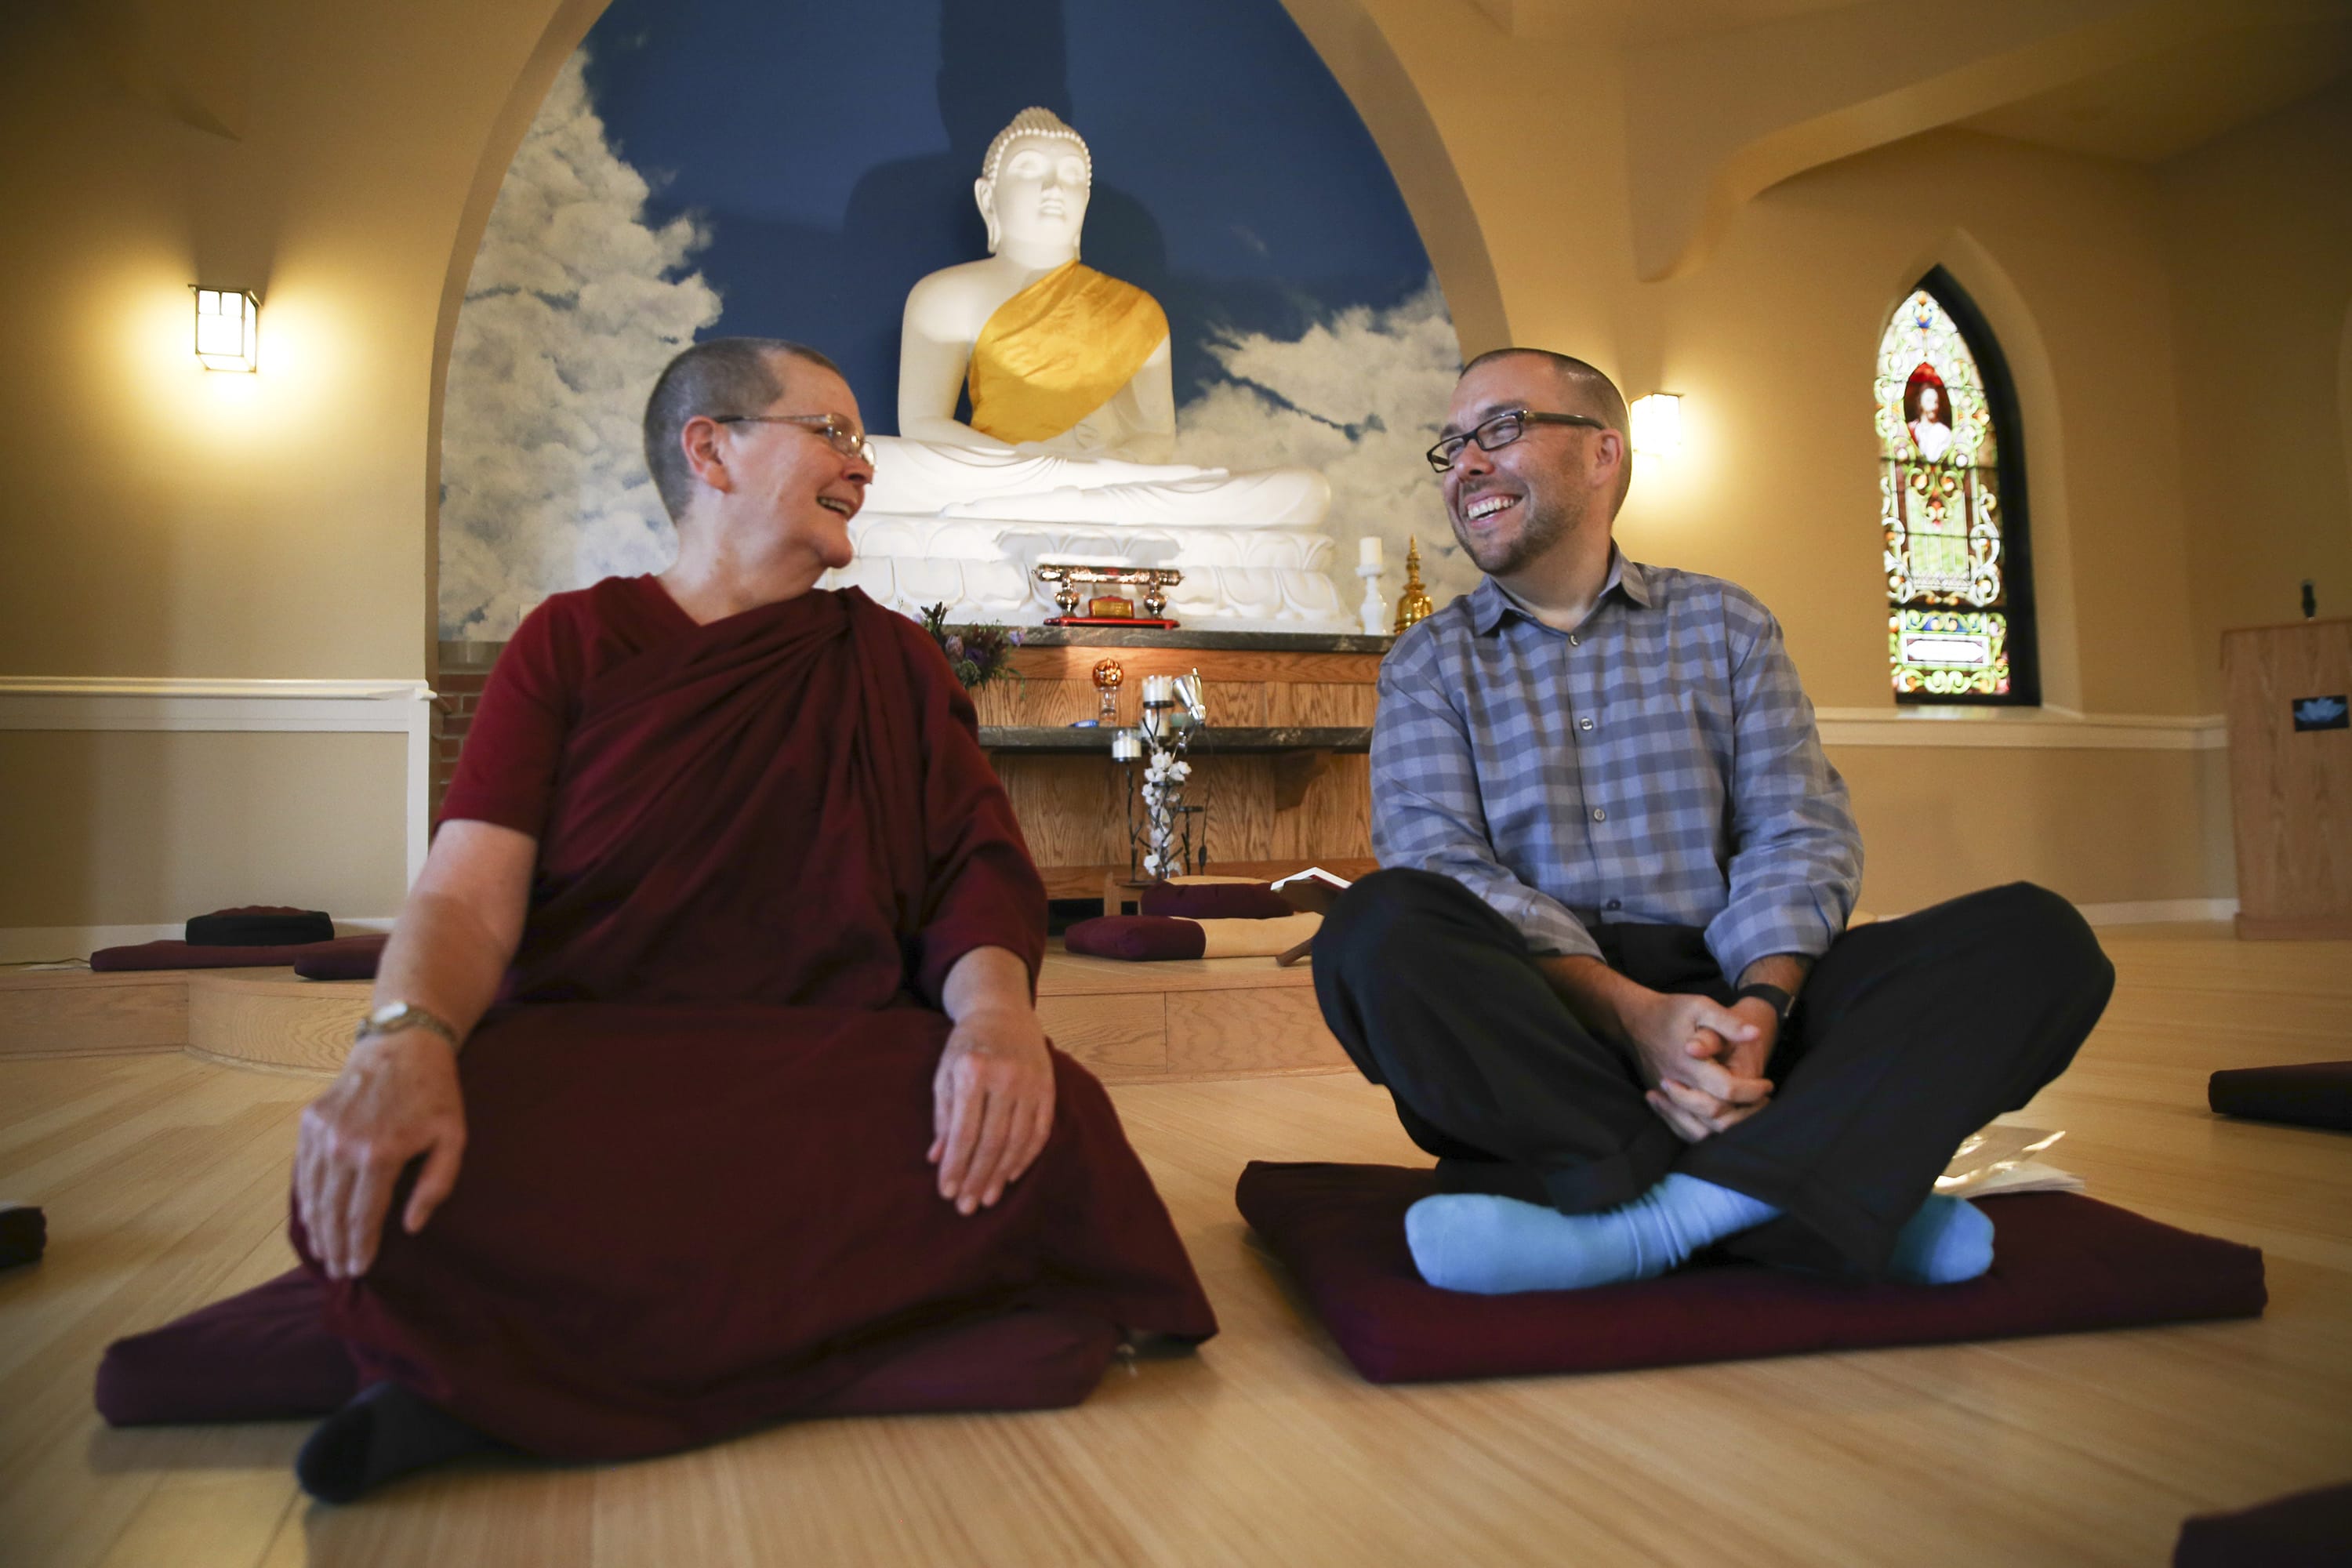 Vimala Bhikkhuni, left, and Tyler Lewke pose for a portrait in the Blue Lotus Buddhist Temple on Sept. 2, 2015 in Woodstock Ill. Buddhist groups can offer lessons in meditation and other teachings to help lead people to sobriety.